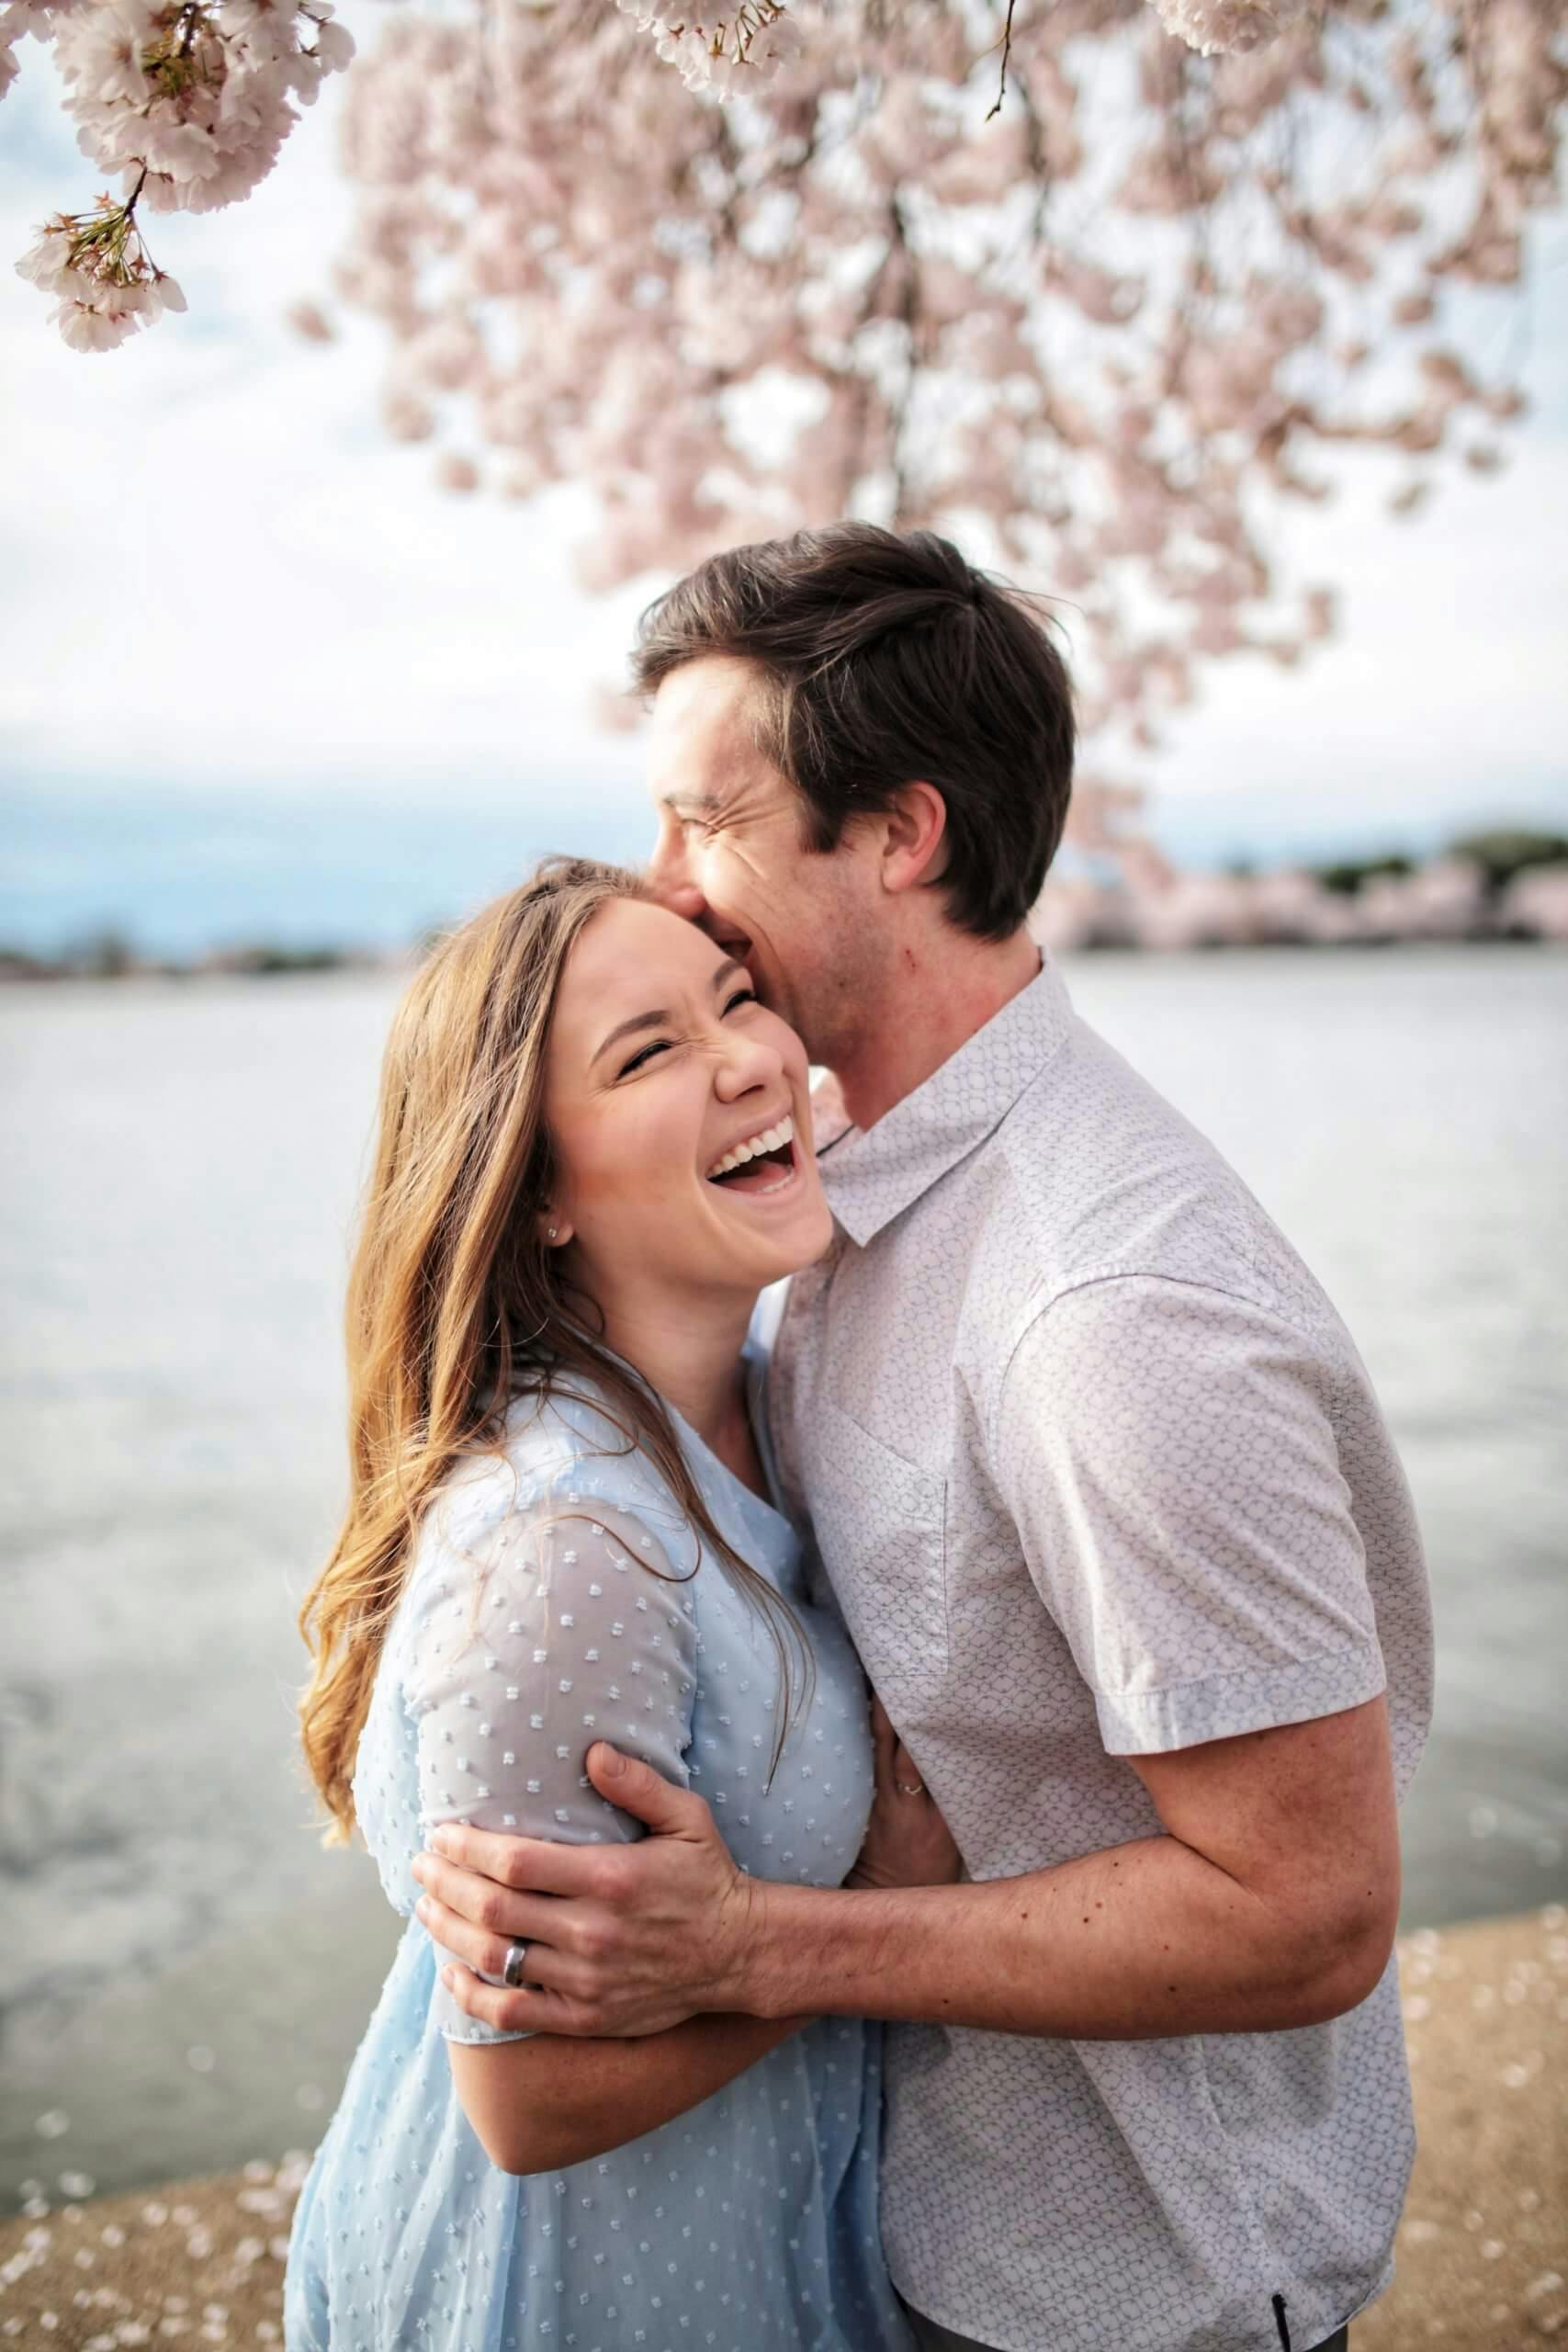 A man and woman embracing and laughing together with cherry blossoms in the background.